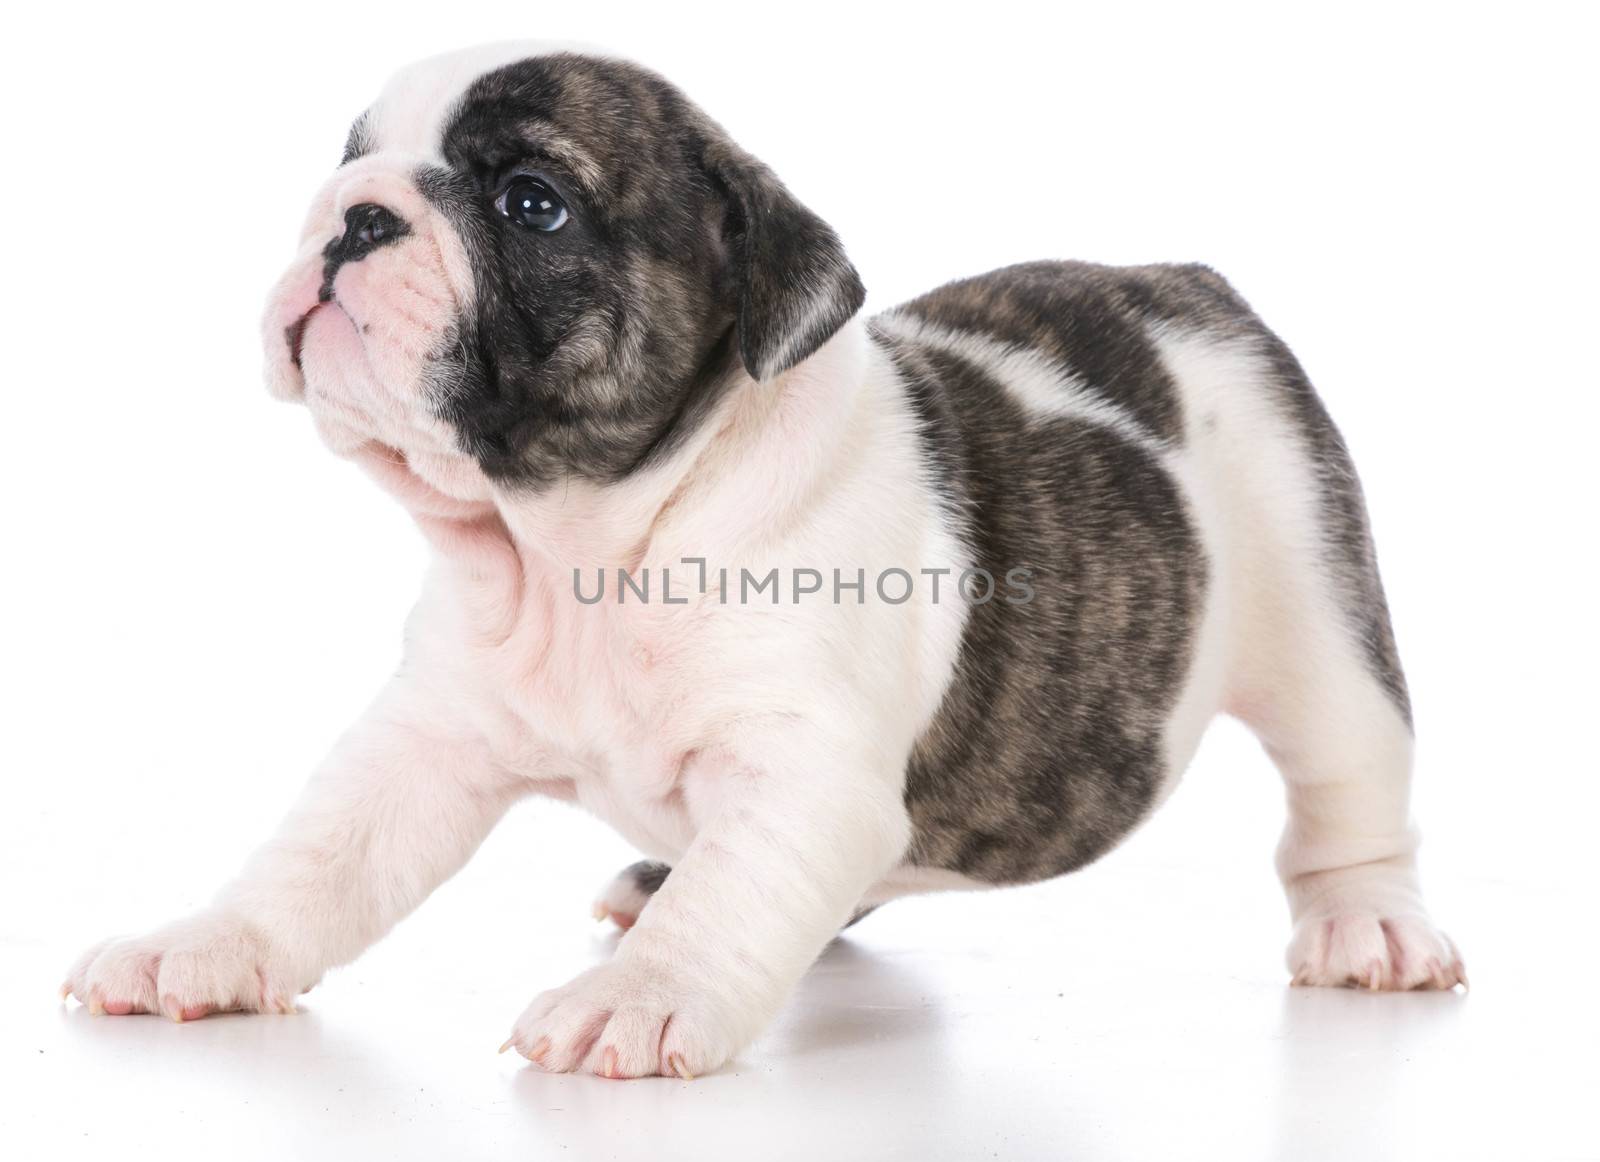 seven week old english bulldog puppy isolated on white background